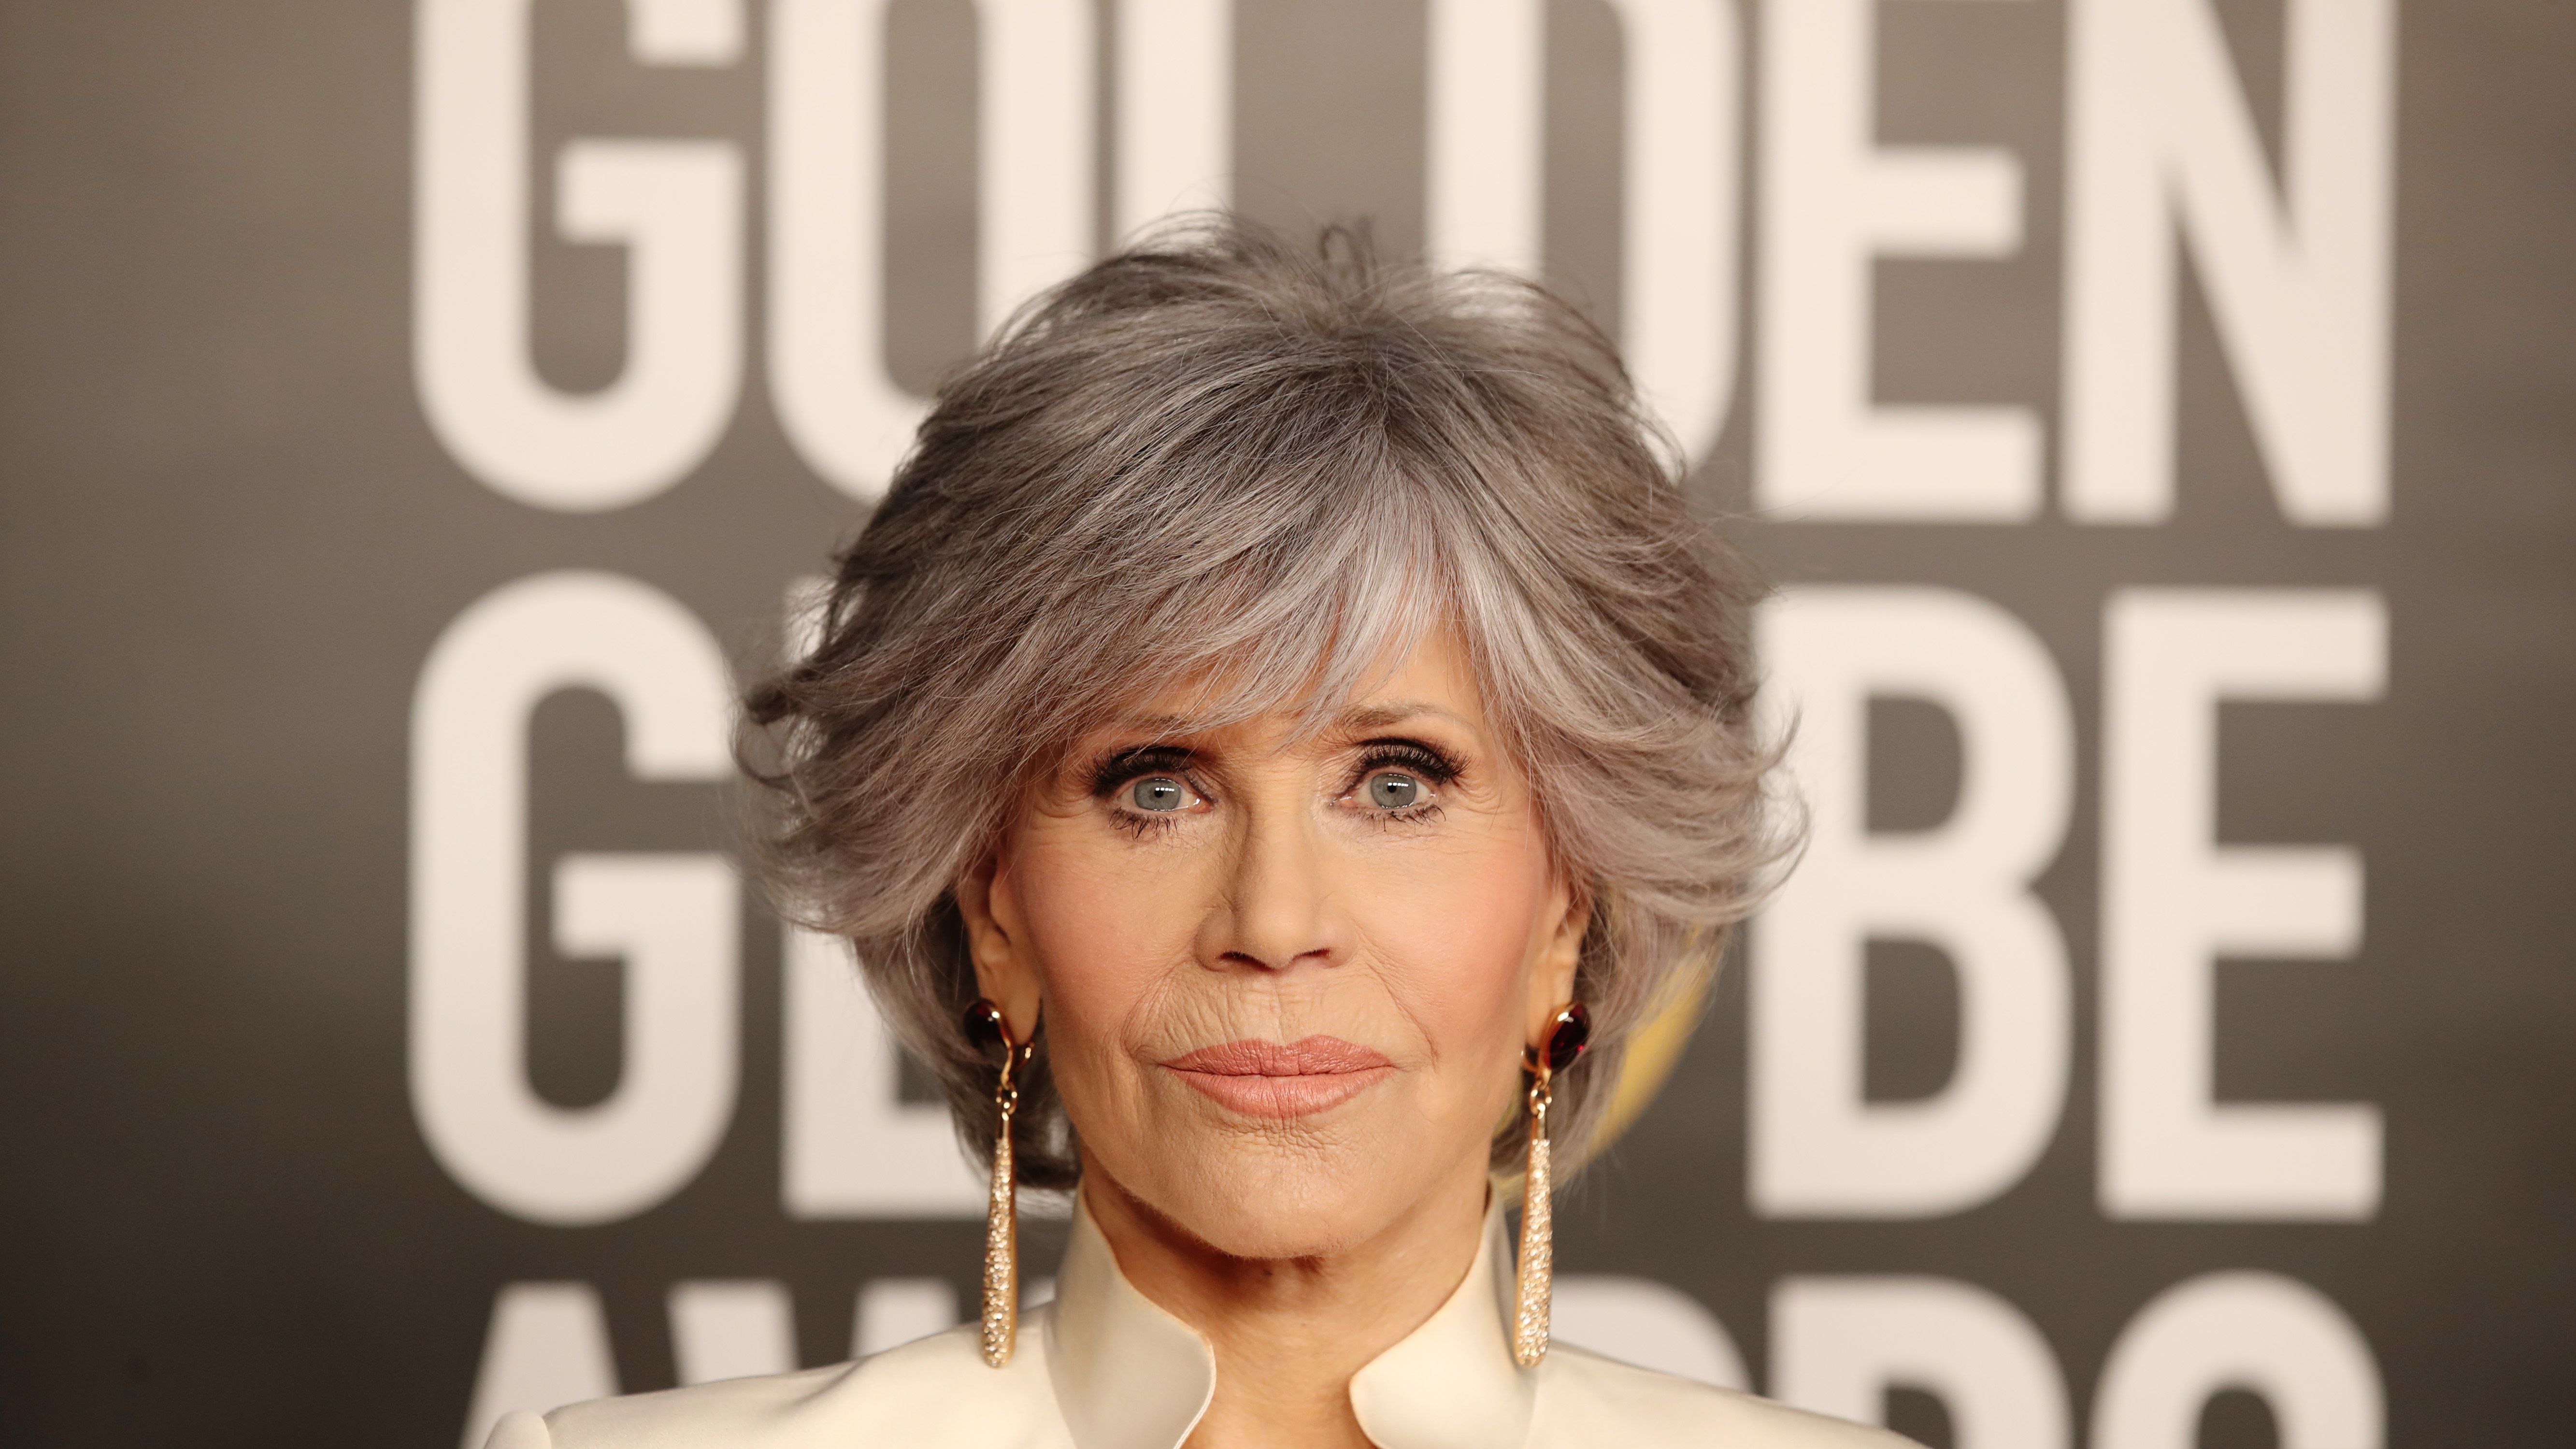 How Jane Fonda Looks So Young at 83 - Jane Fonda's Advice for Aging Well